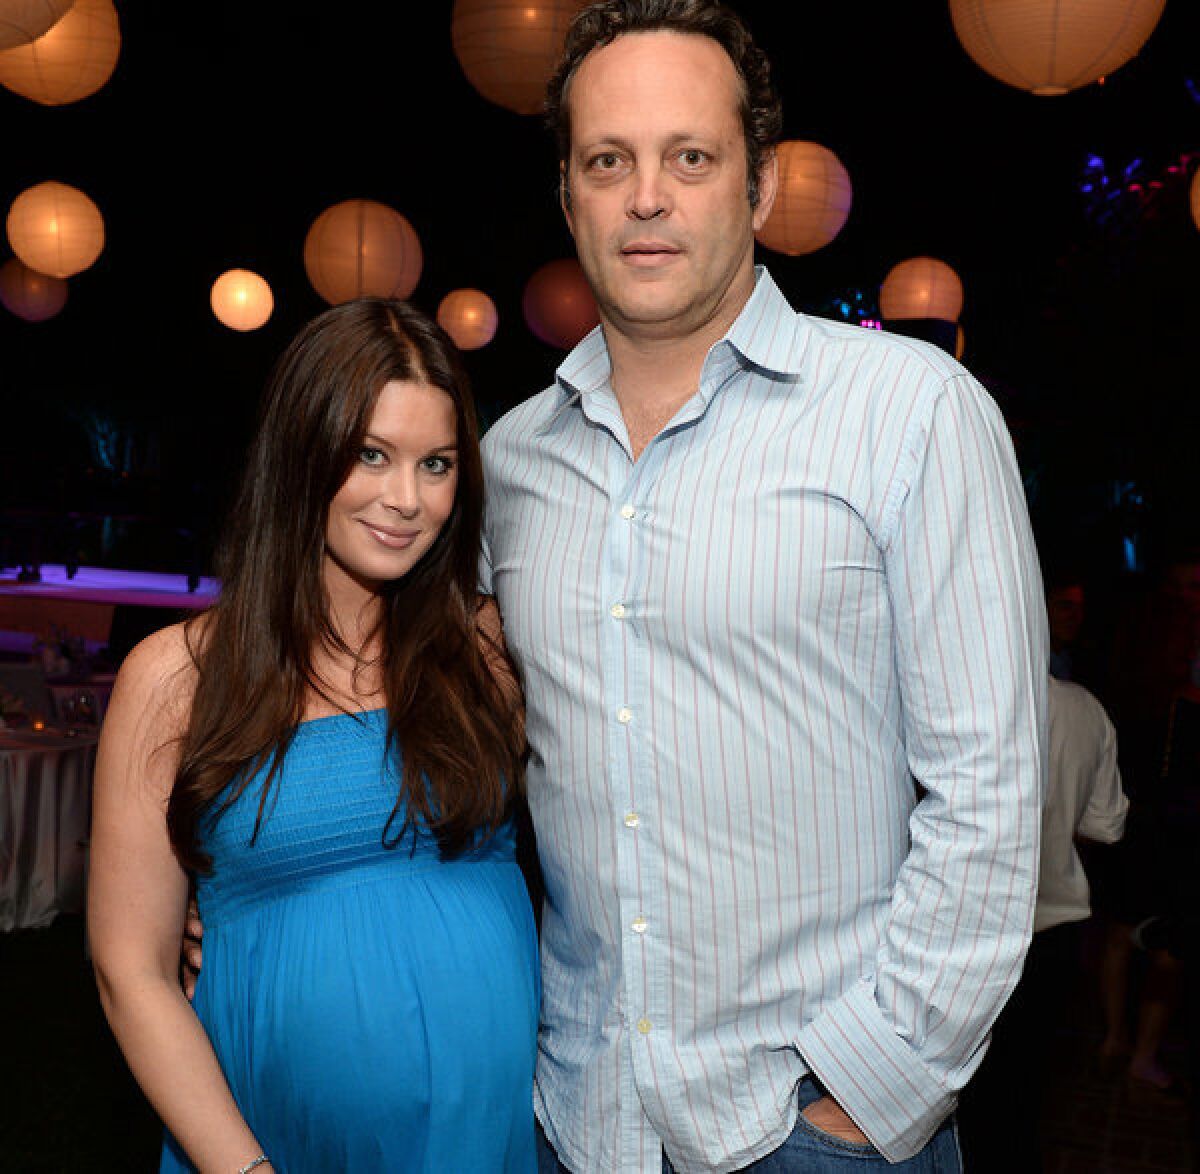 Actor Vince Vaughn and wife Kyla Weber have welcomed their second child, a boy.